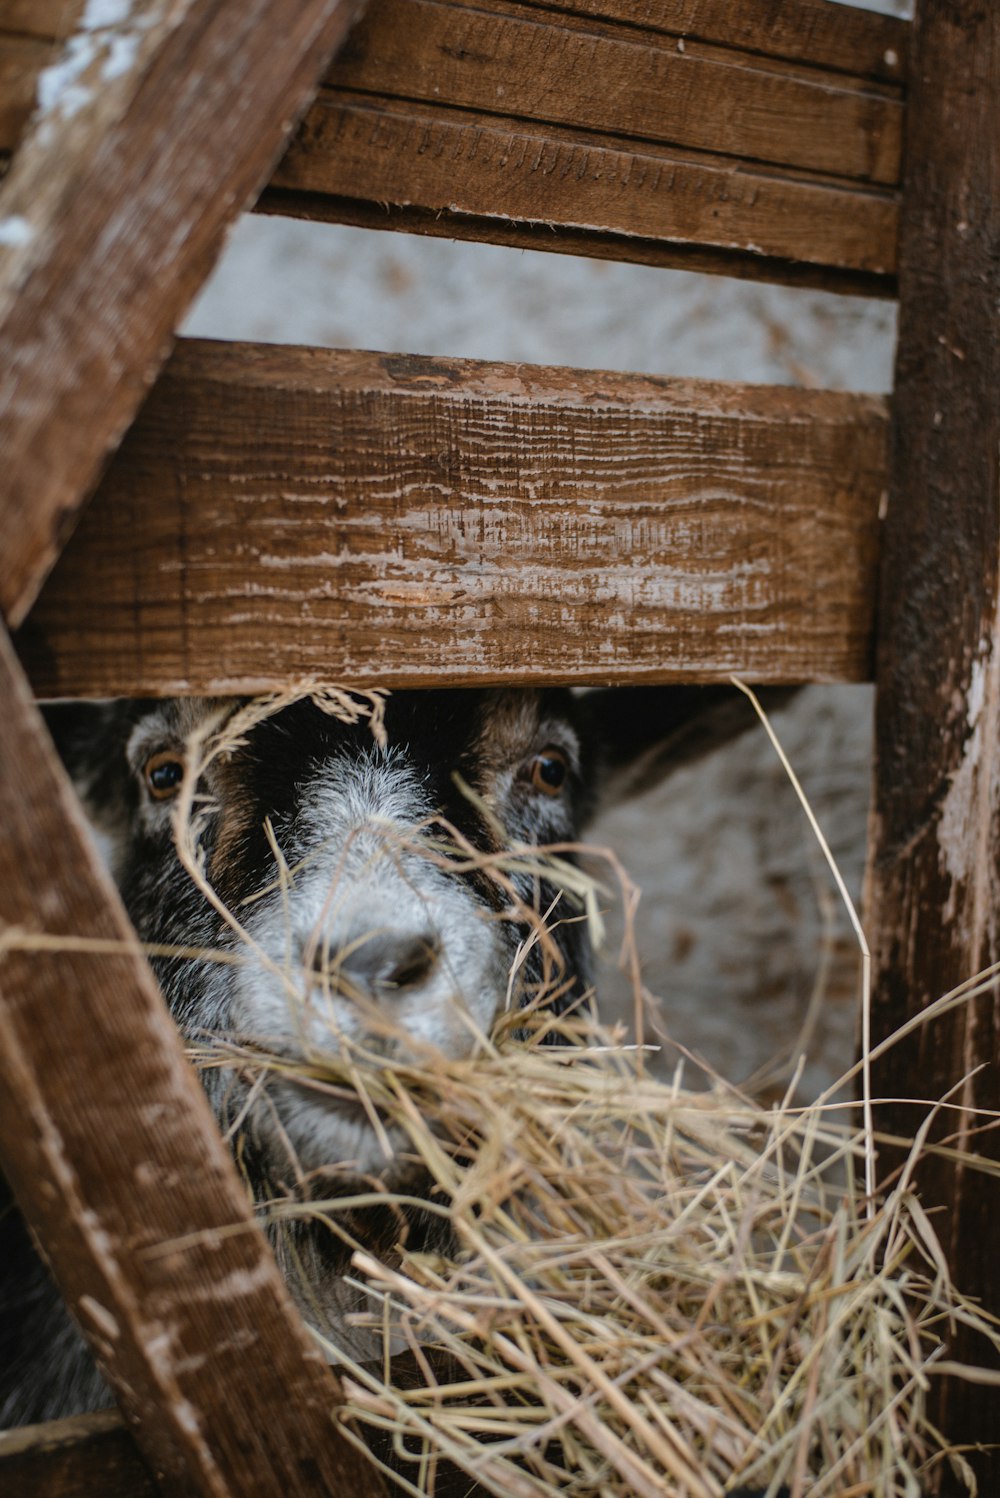 a black and white goat eating hay under a wooden structure